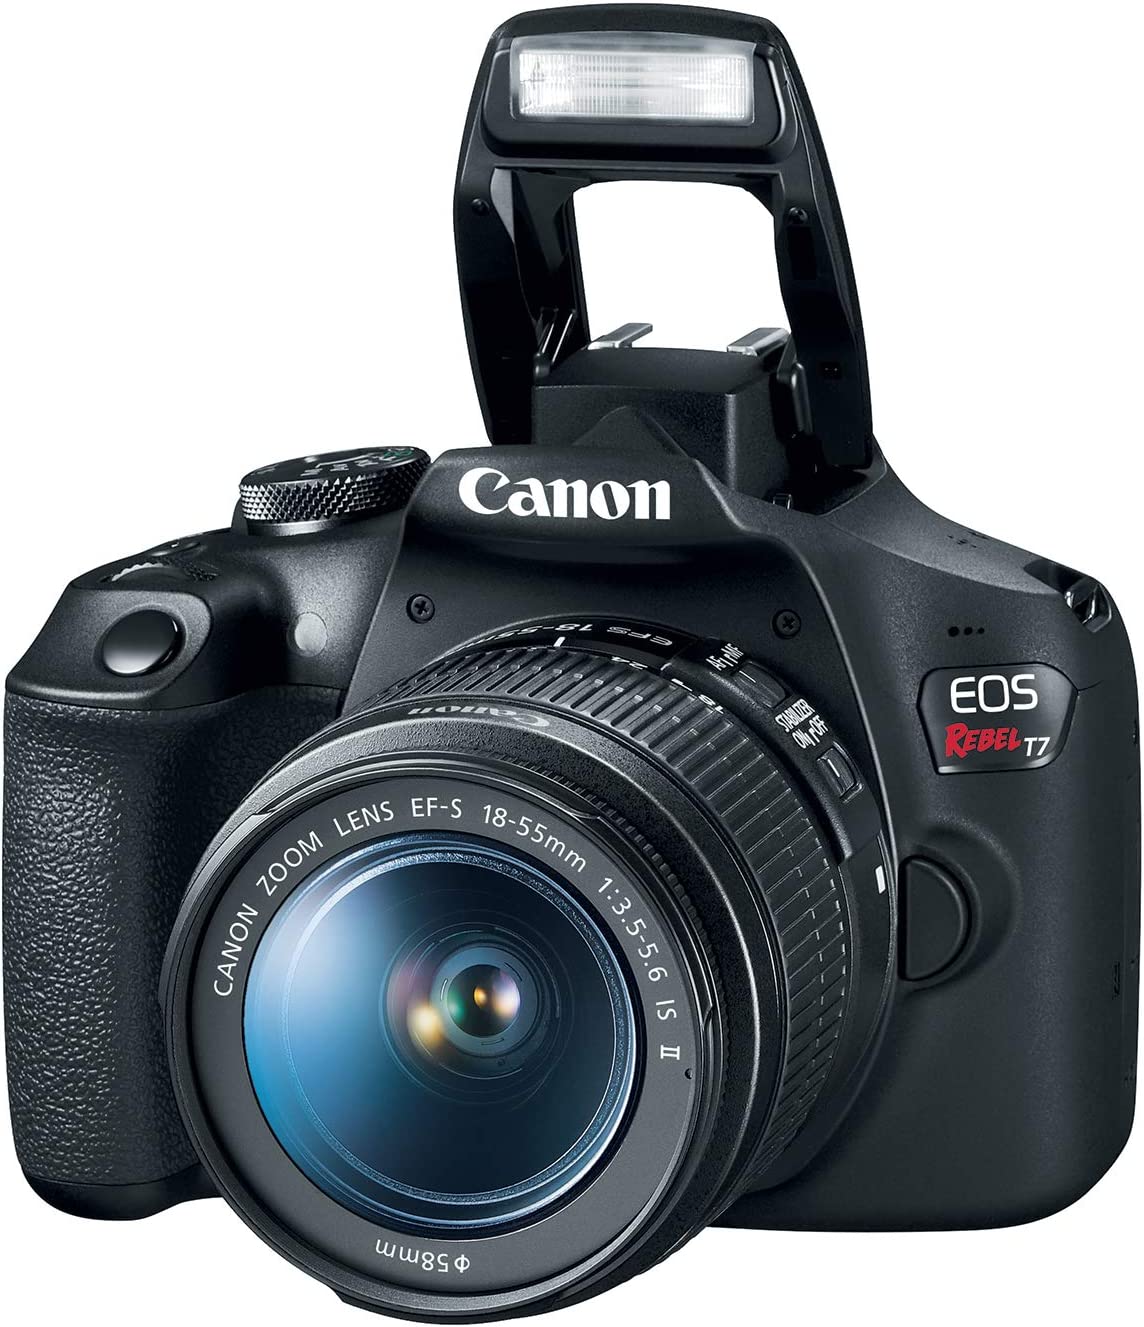 Canon 2727C023 EOS Rebel T7 24.1MP Digital SLR Camera Bundle with EF-S 18-55mm IS Lens, 70-300mm Lens, 32GB SD Card - image 3 of 4